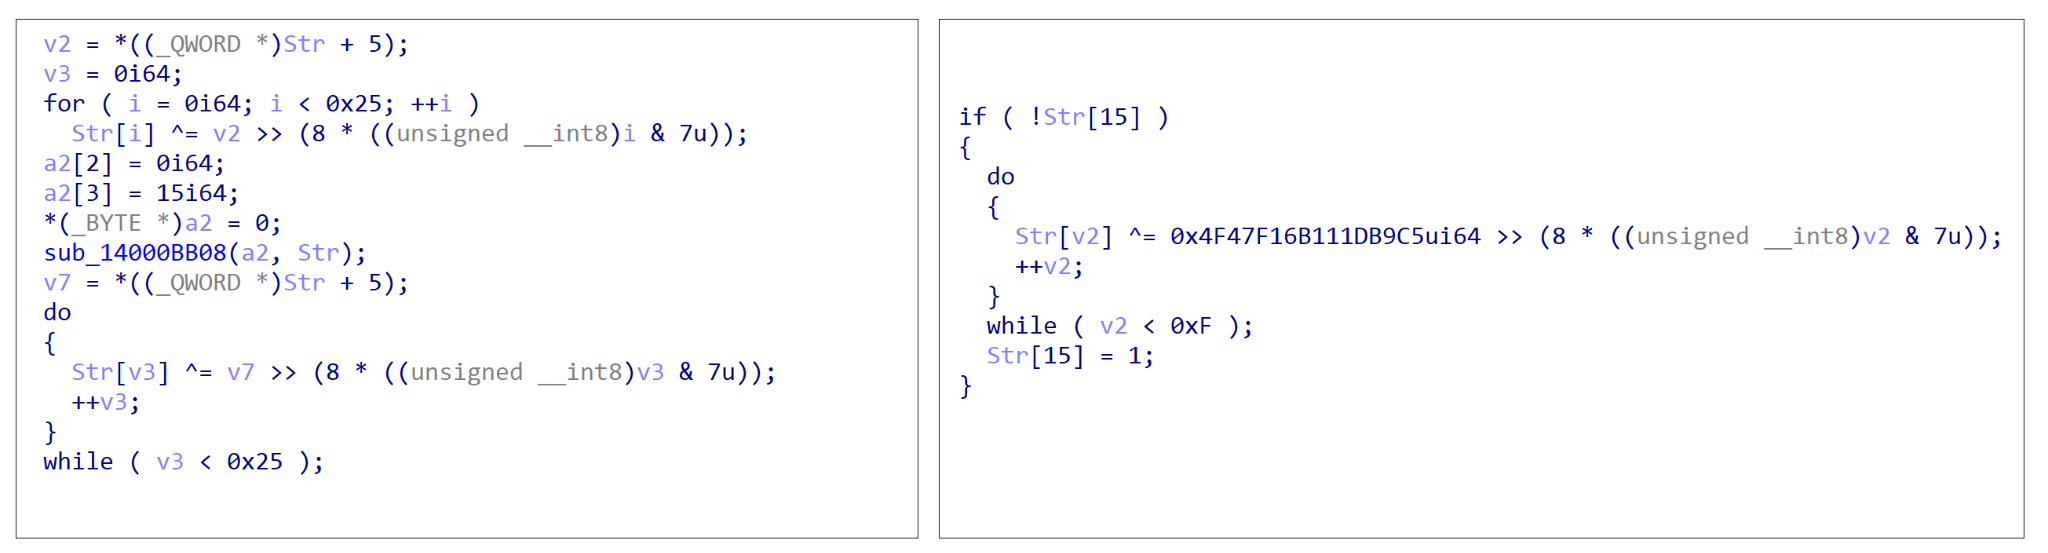 Image 9 is two screenshots of code, one on the left and one on the right. The code in the left box is the first string description function type. The code in the right box is the second string decryption function type.